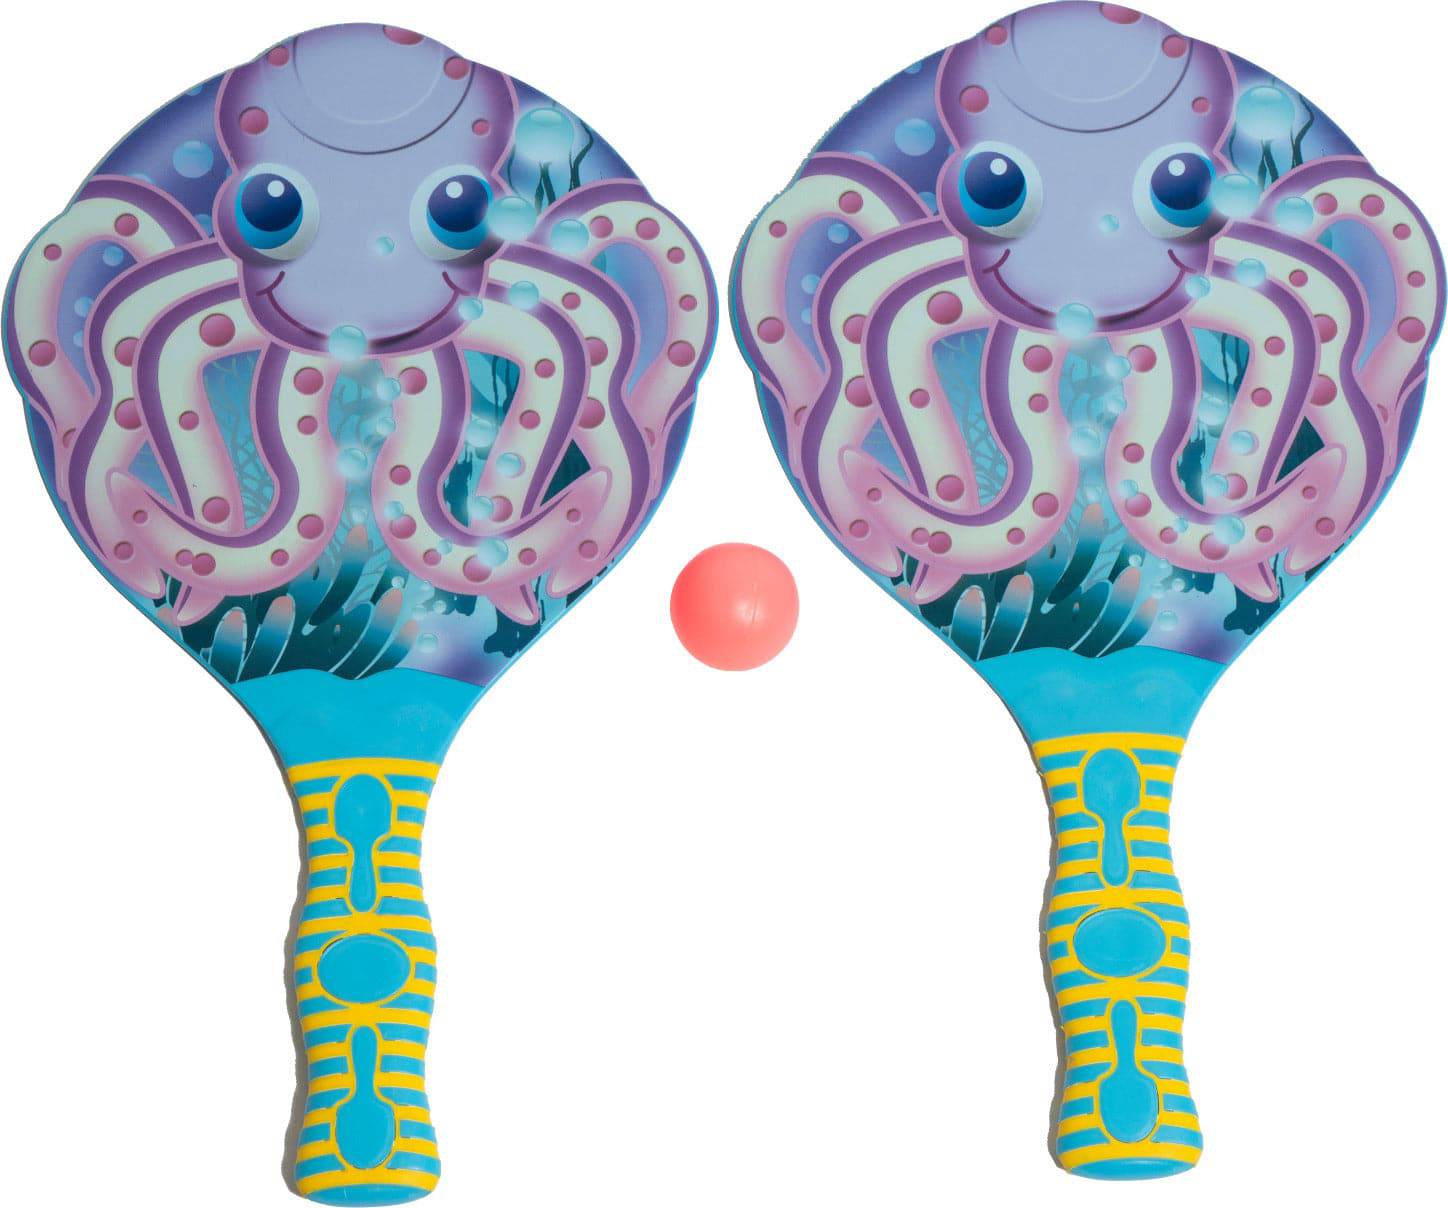 Paddle Pals - A Child's Delight